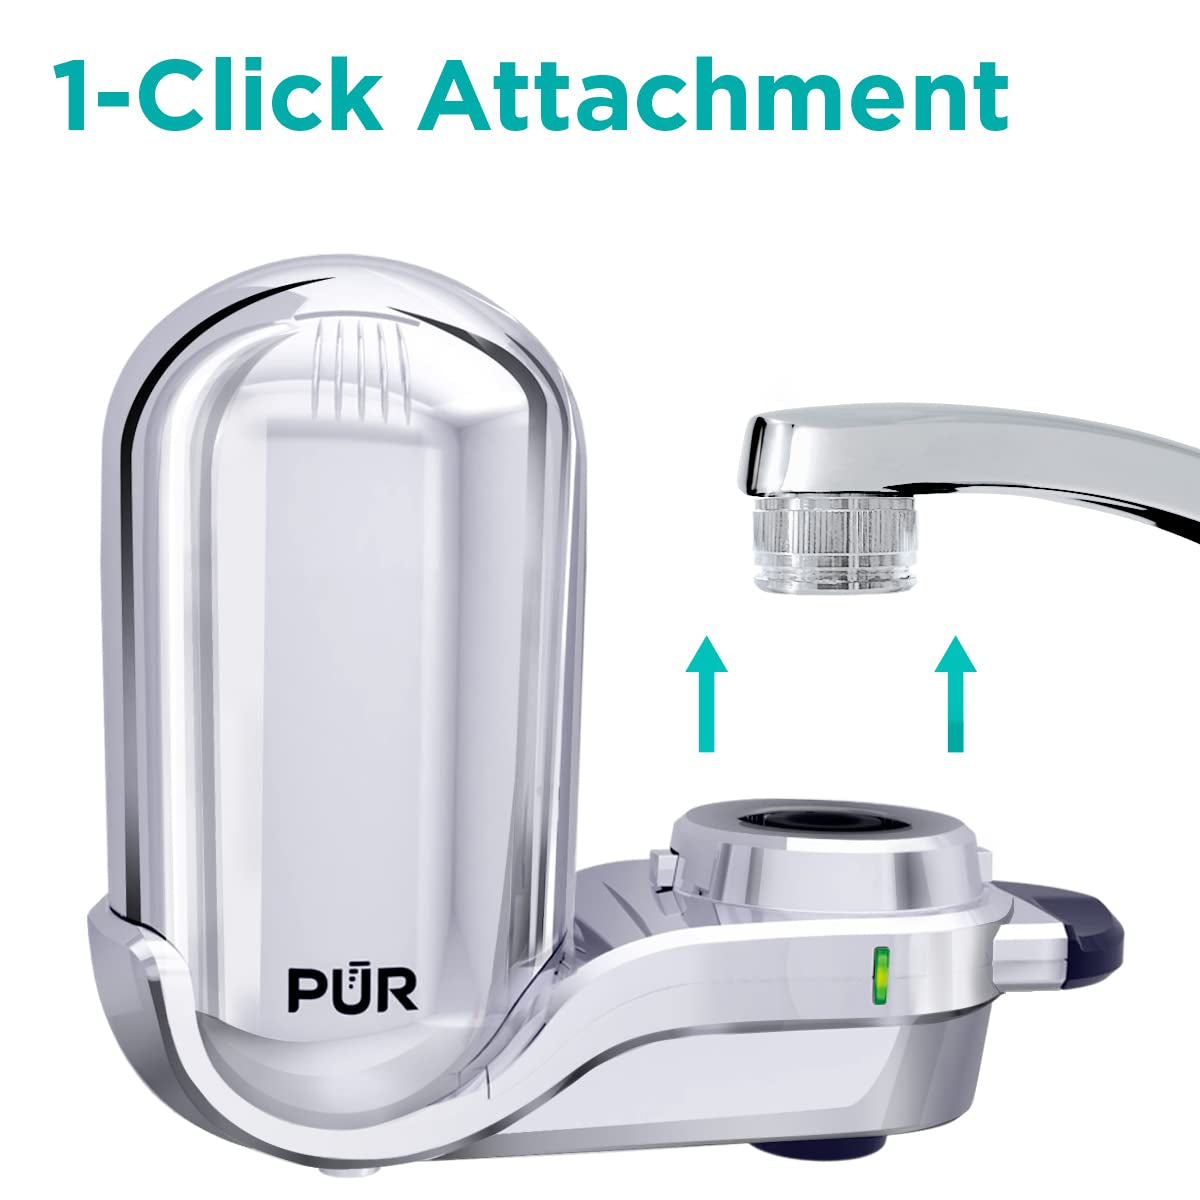 plus Faucet Mount Water Filtration System, Chrome – Vertical Faucet Mount Water Filter for Sink – Crisp, Great-Tasting Filtered Water, FM3700